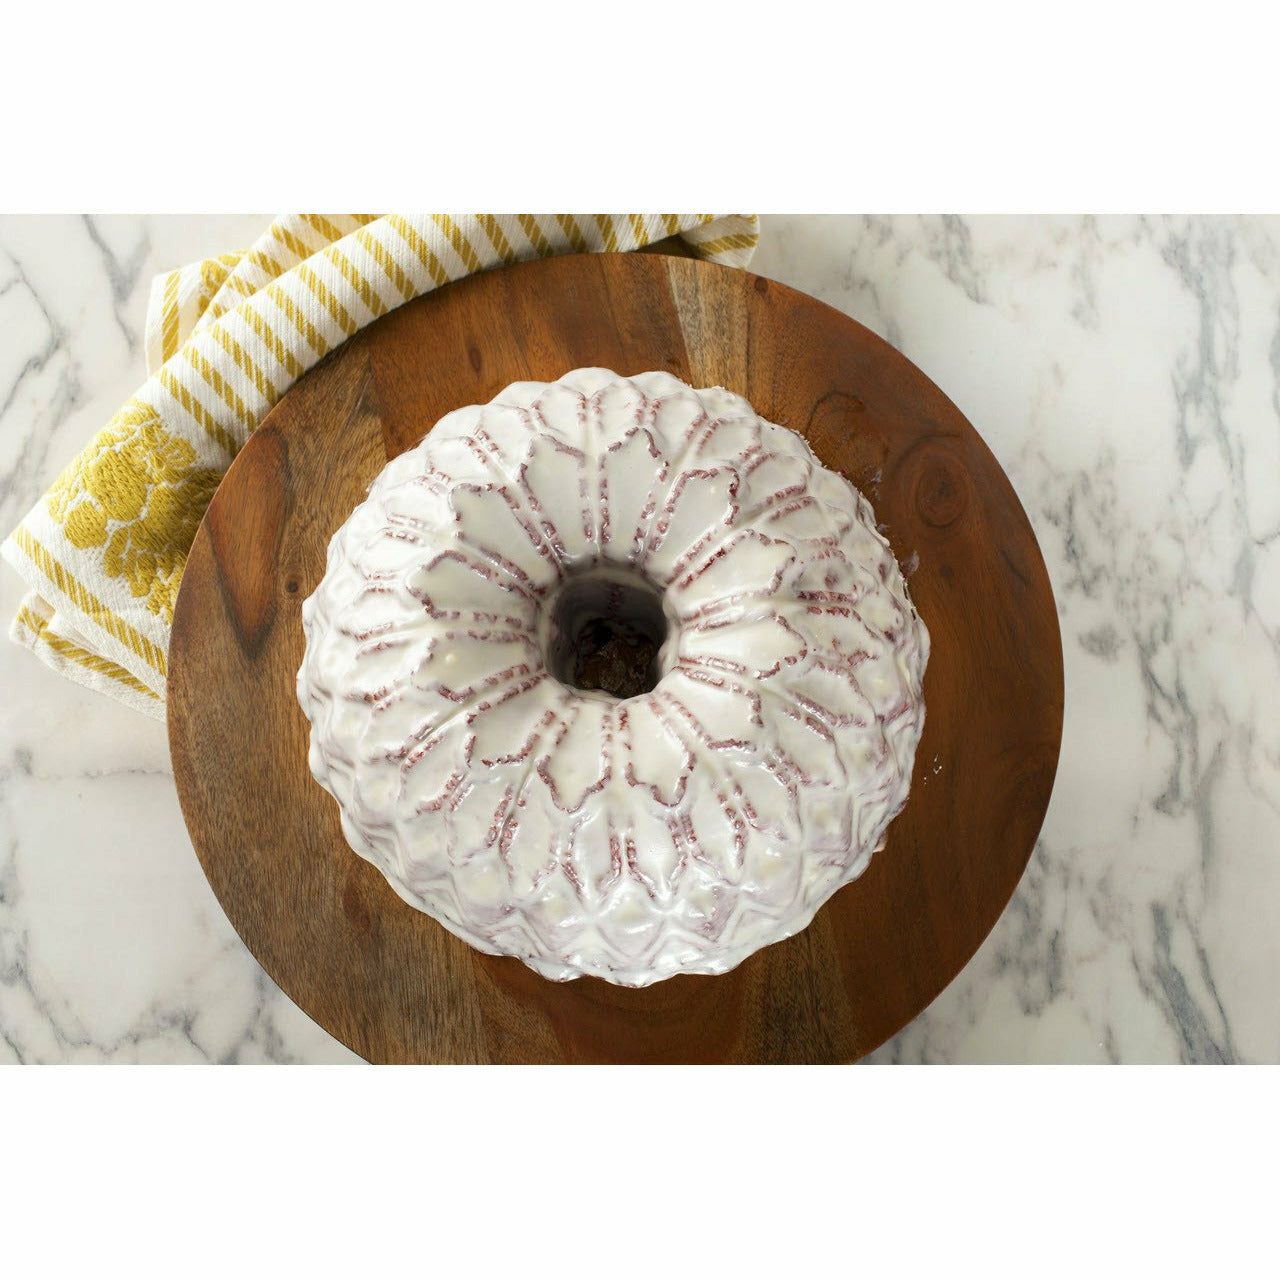 https://cdn.shopify.com/s/files/1/0269/2294/2529/products/NordicWare-Stainled-Glass-Bundt-Pan-with-White-Glazed-Cake__53448.1607214210_1800x1800.jpg?v=1637268529